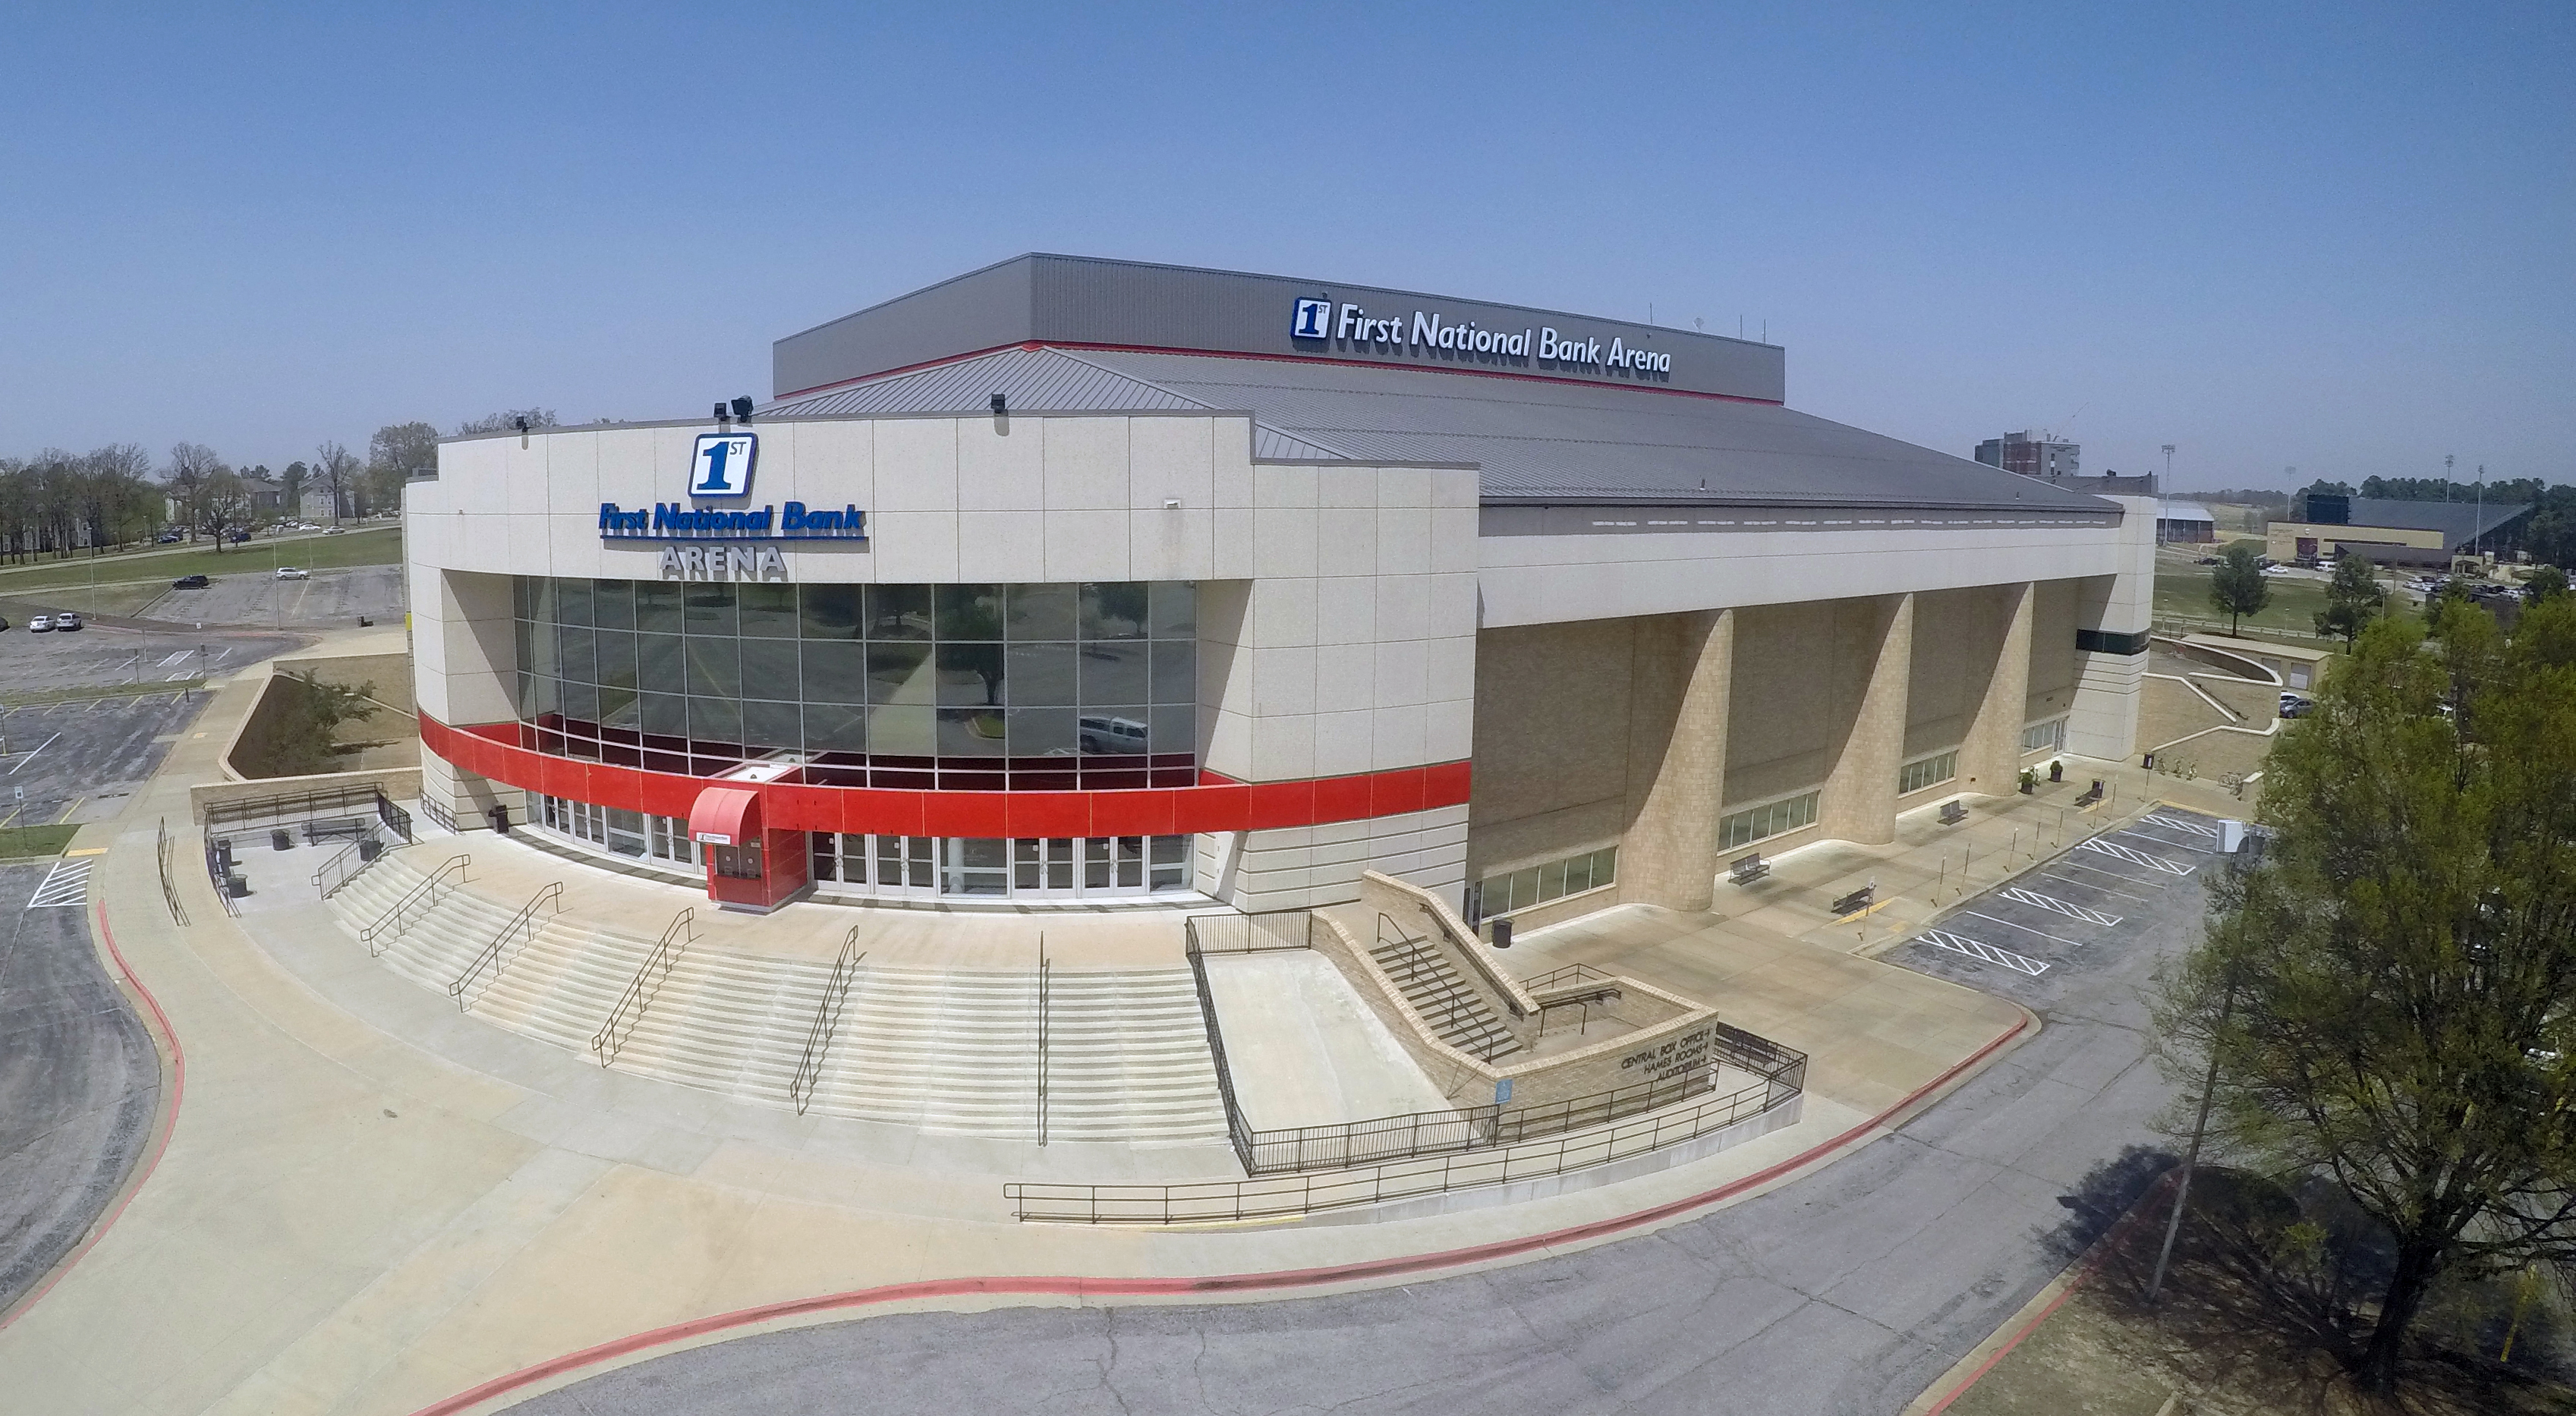 First National Bank Arena